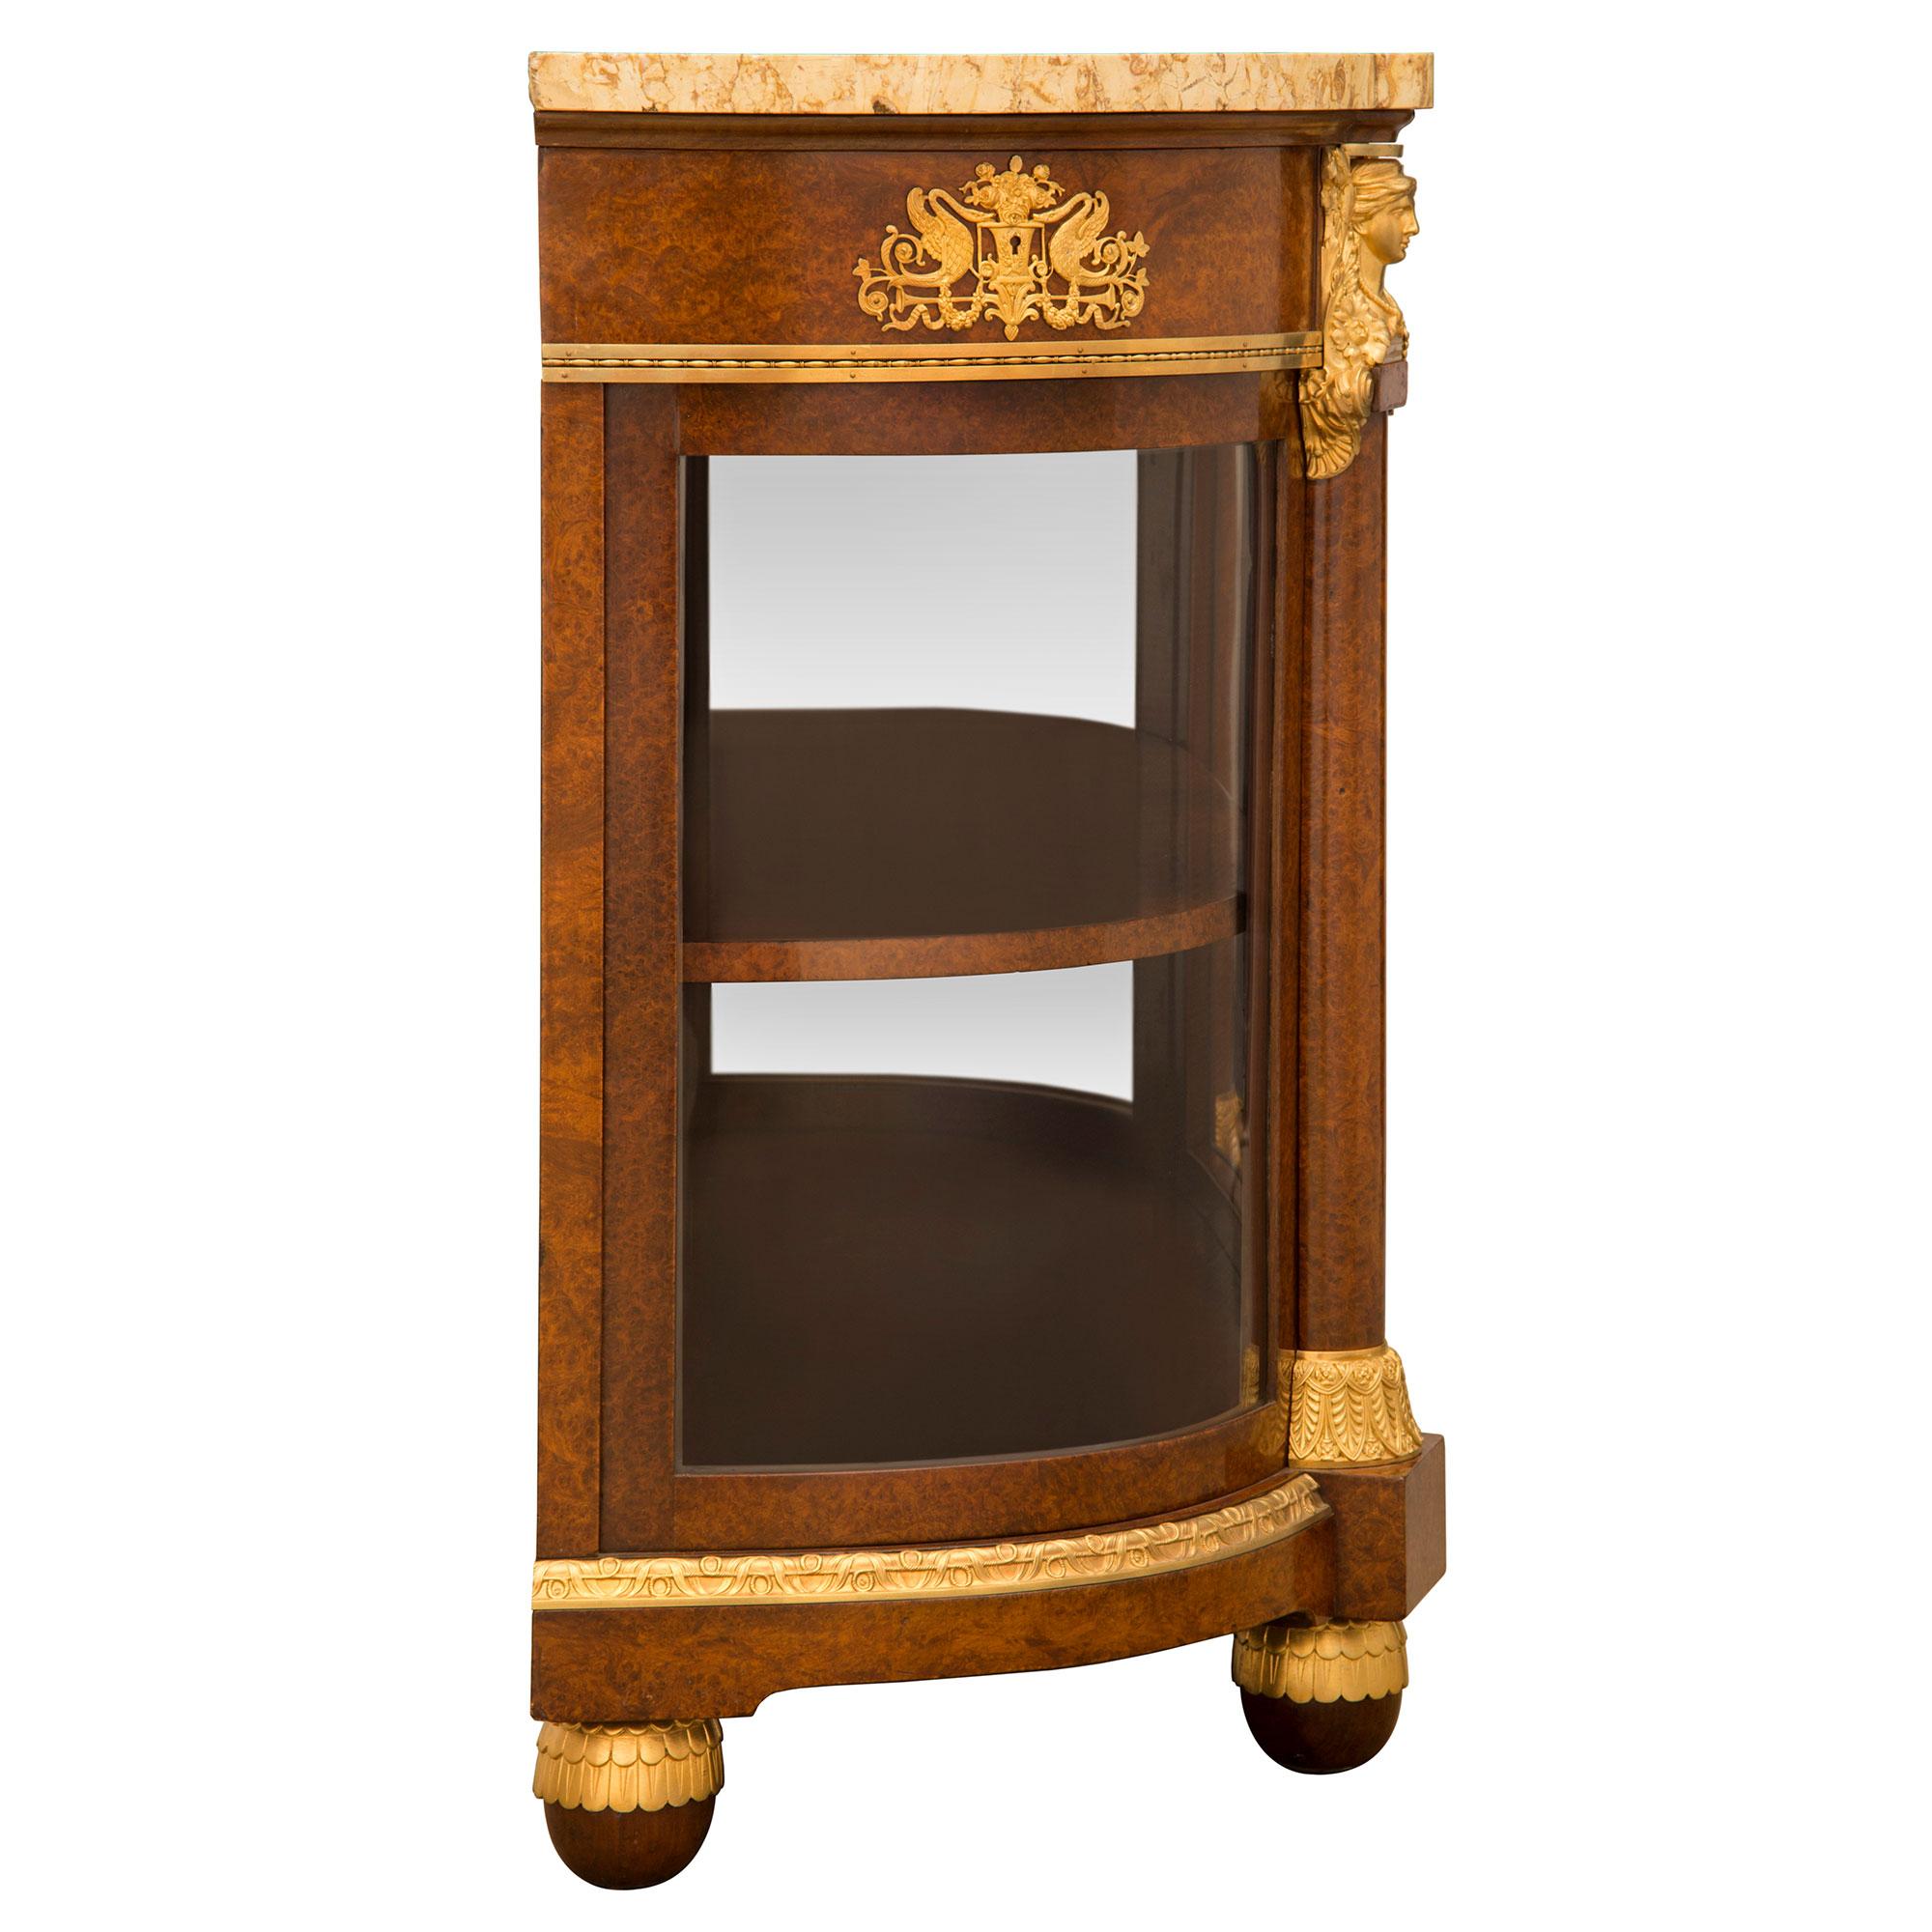 French 19th Century Neoclassical Style Burl Walnut and Ormolu Buffet Vitrine For Sale 2